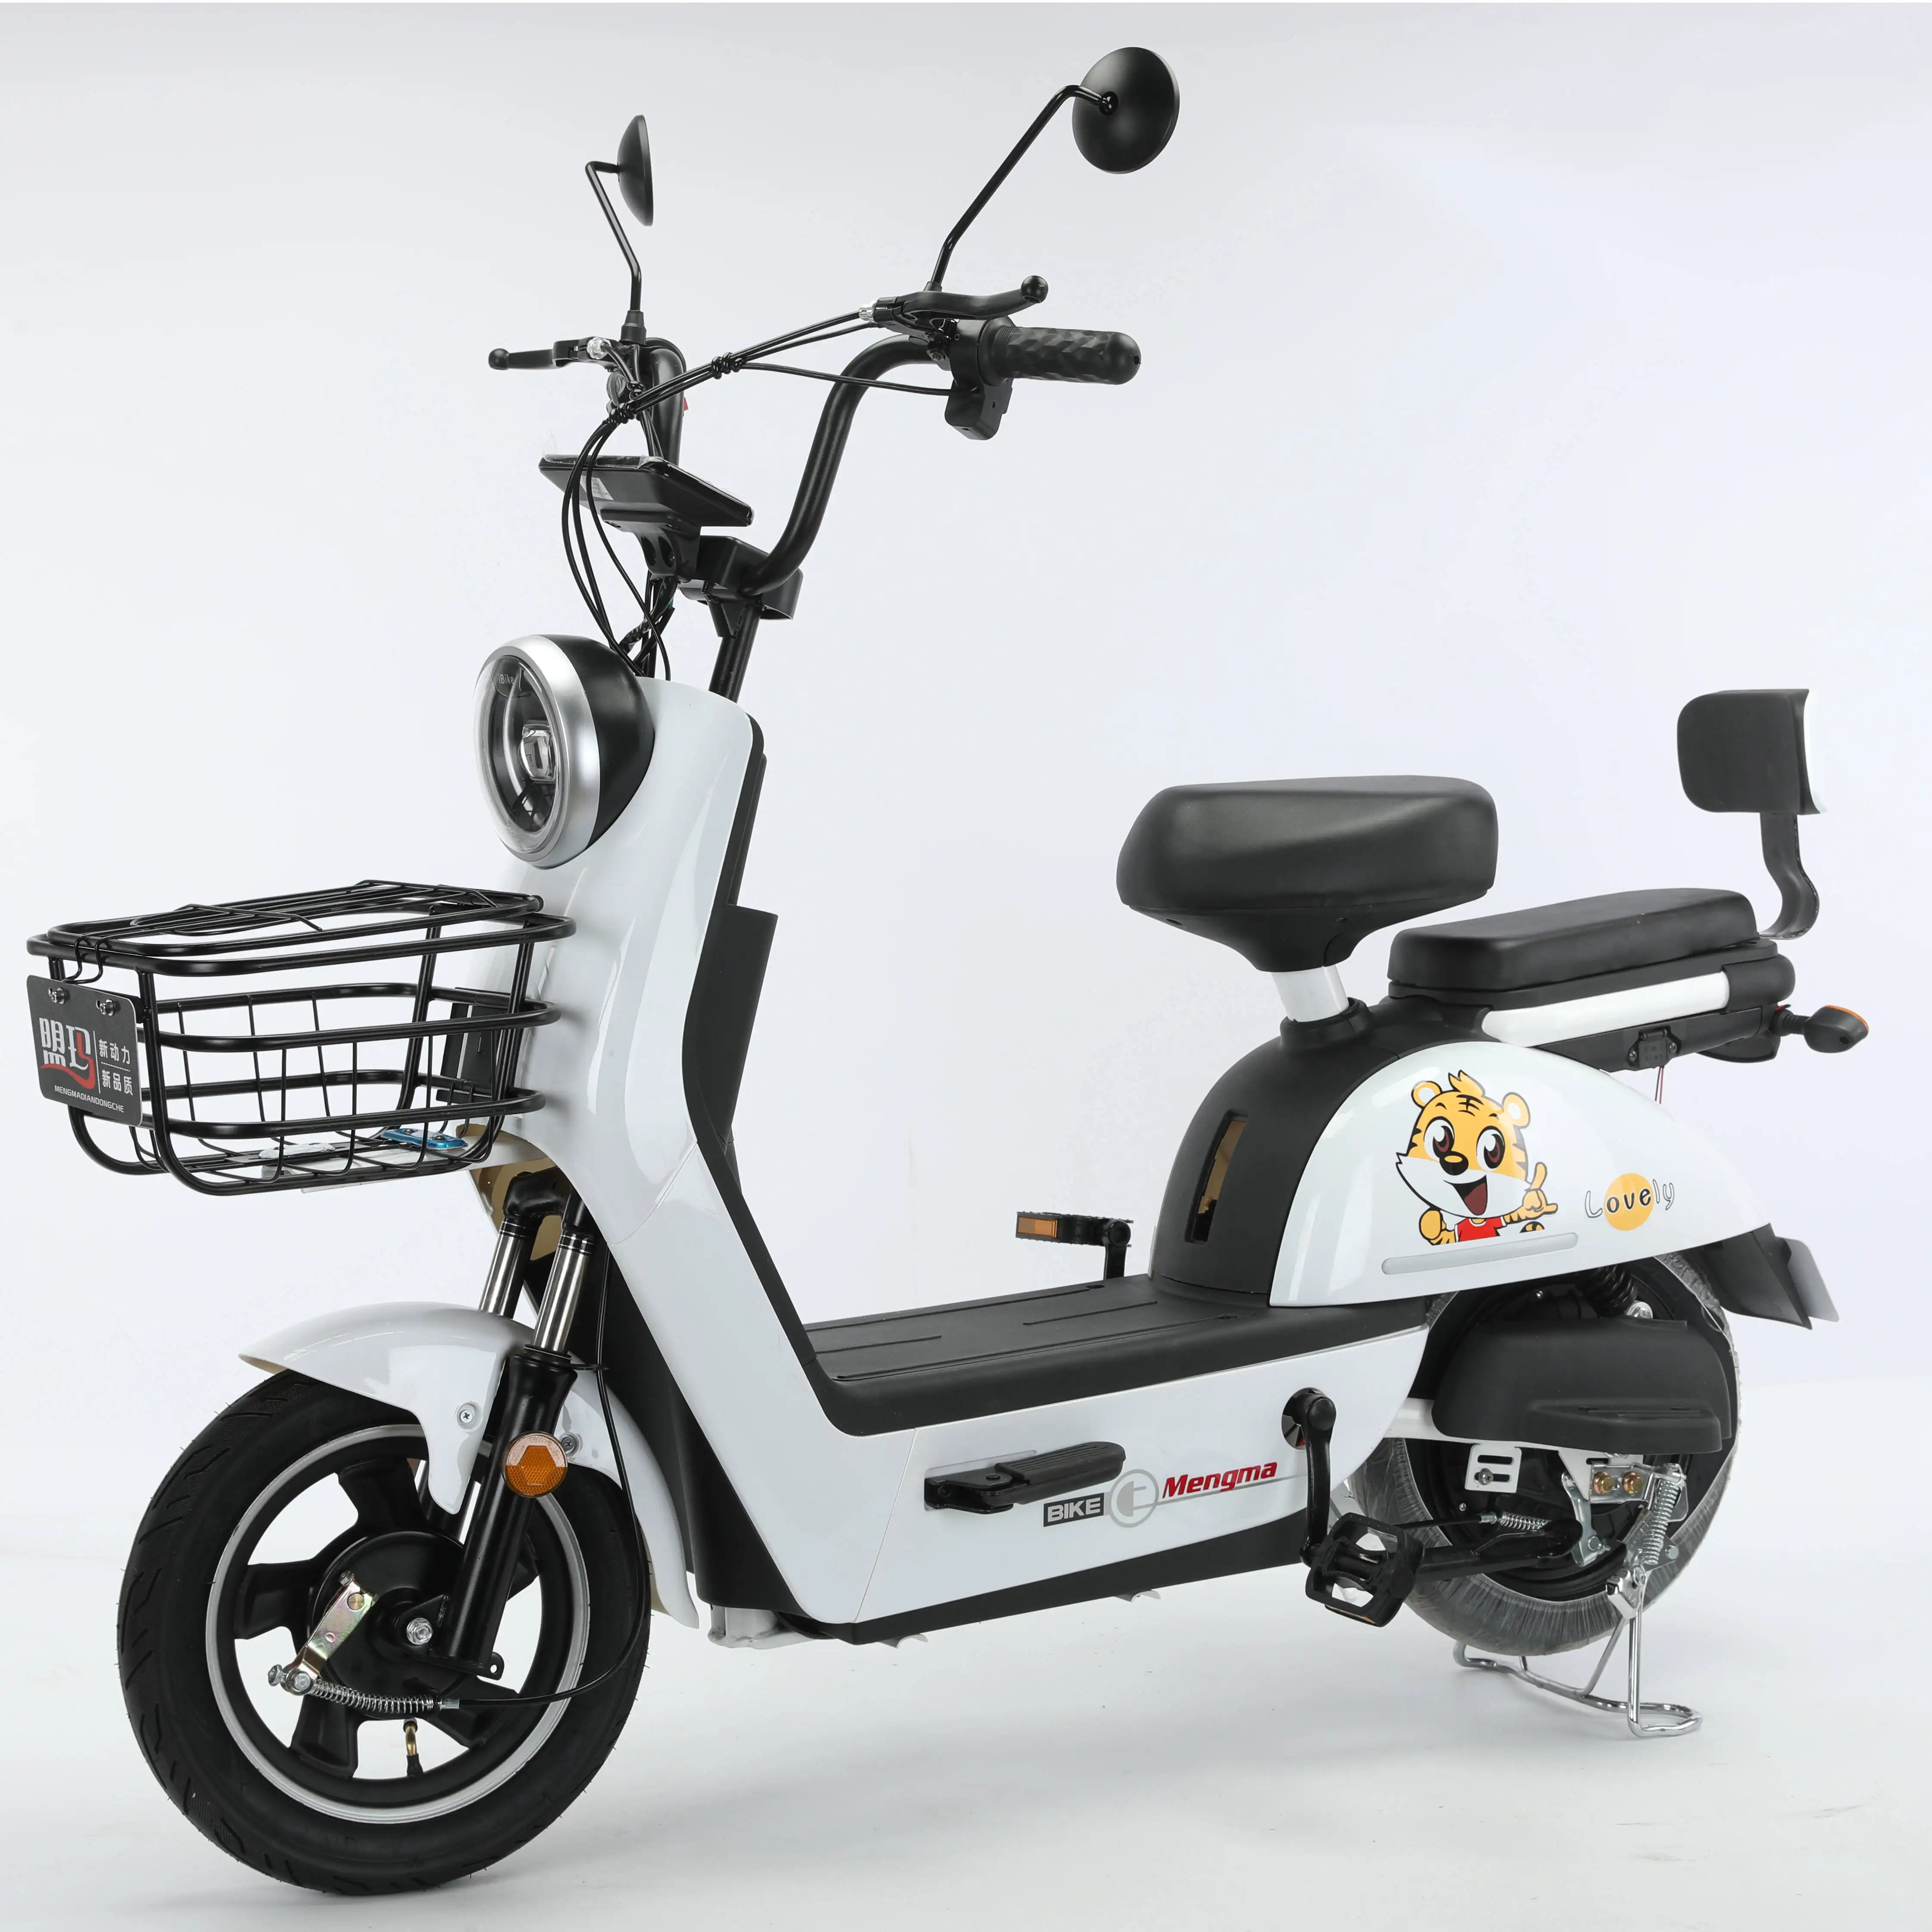 Wholesale High Quality E-bikes Prices Electrical Bike from China for Adults LED Electronic Customized Logo 48V E-bike 7 Speed